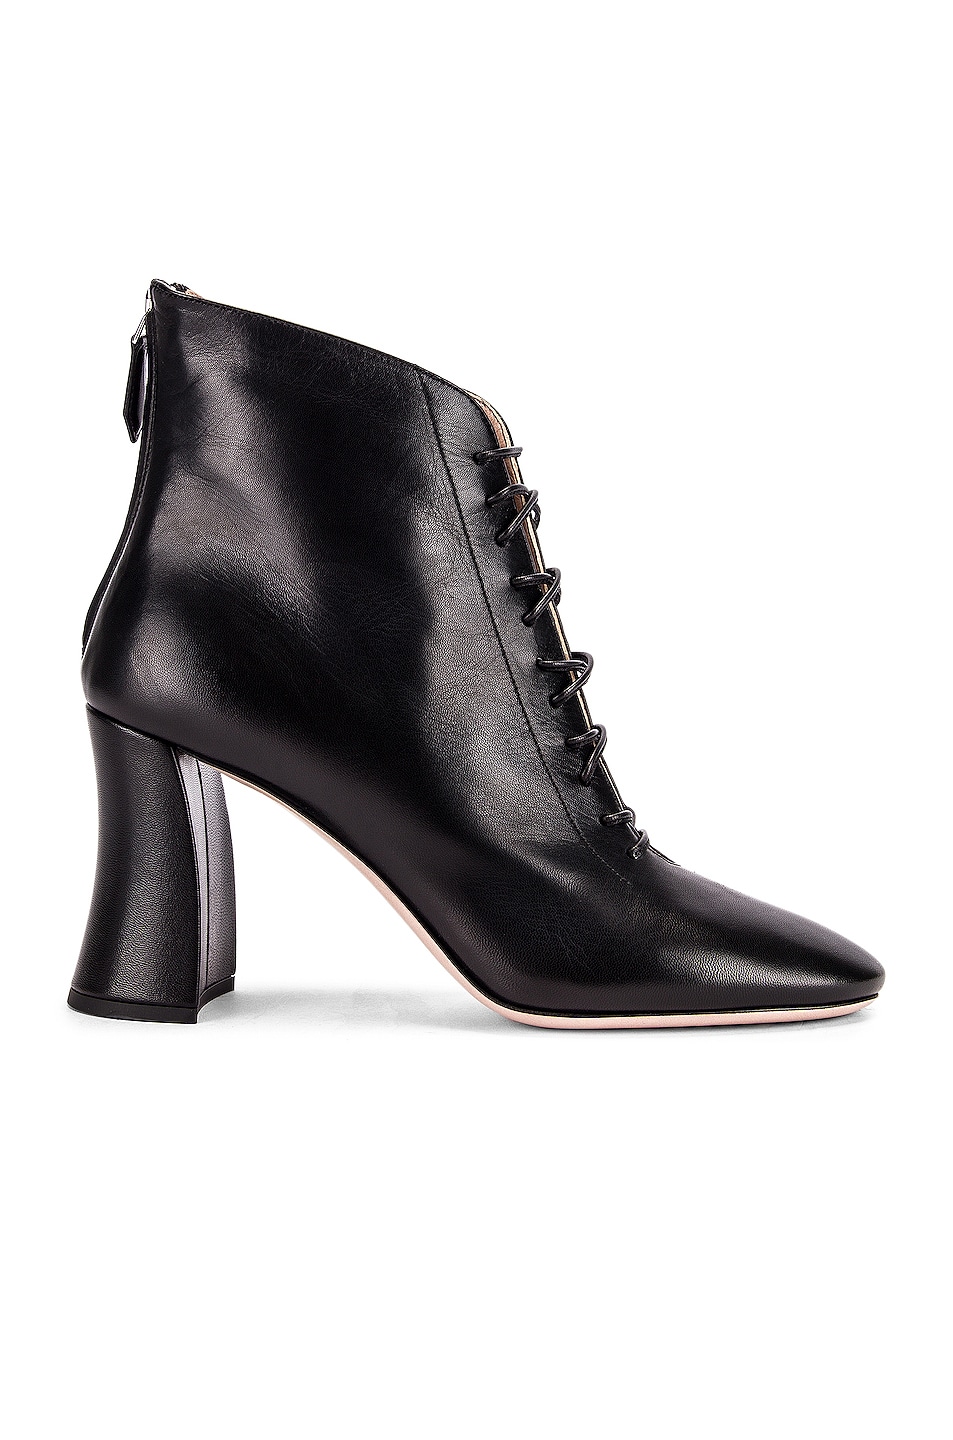 Image 1 of Miu Miu Lace Up Leather Ankle Boots in Black